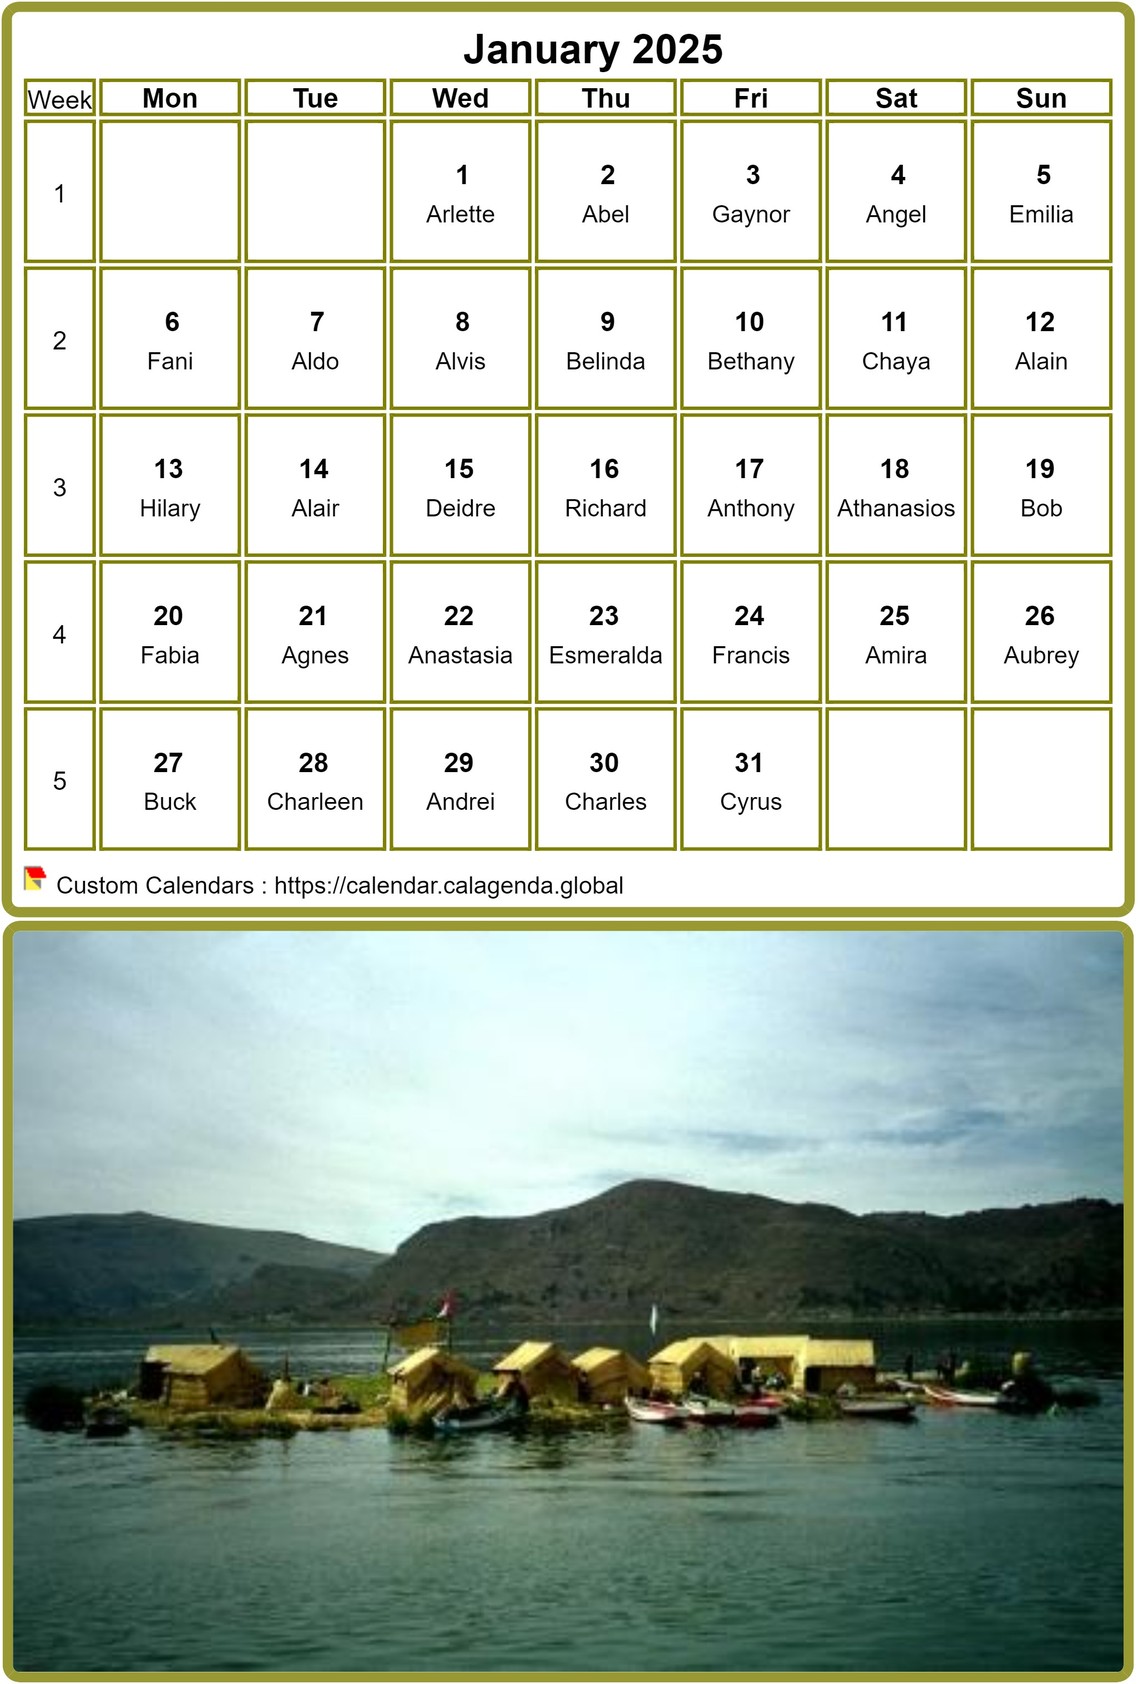 Calendar monthly 2025, table with photo